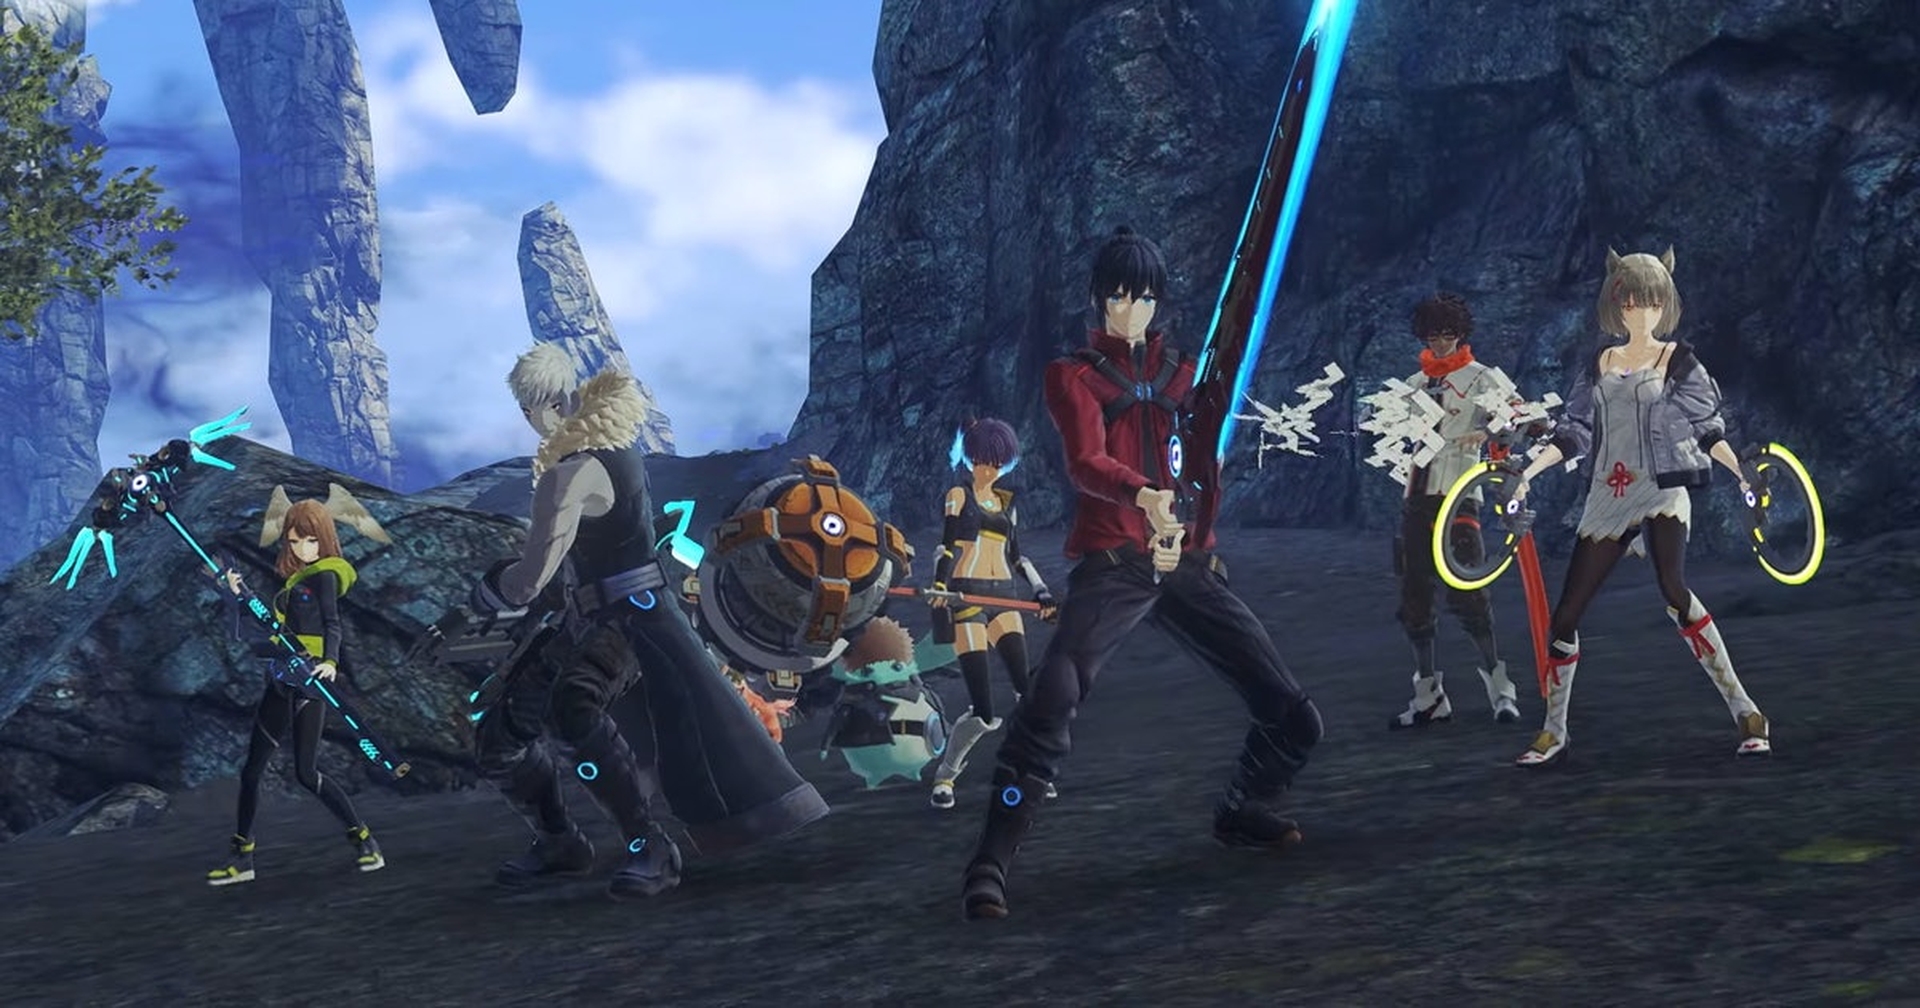 Critically aclaimed RPG Xenoblade Chronicles 3 is extremely fun, but you might want to level up fast, so here is our Xenoblade Chronicles 3 XP farming guide.